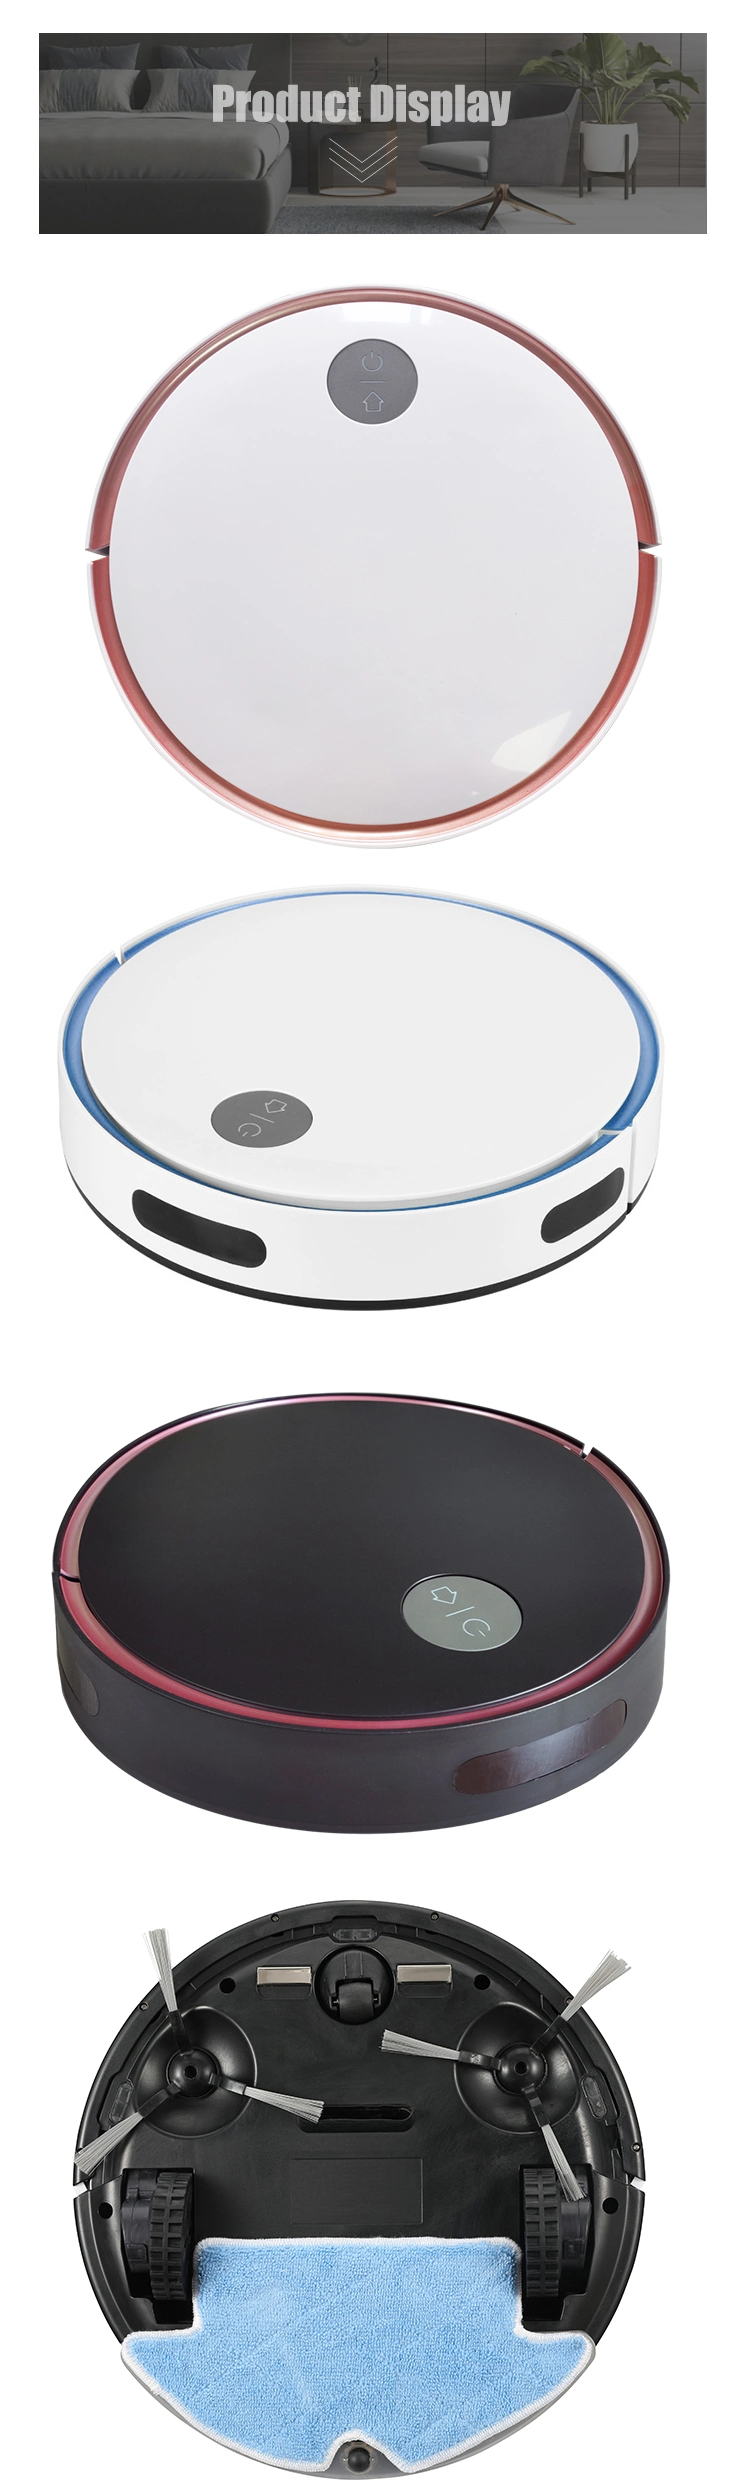 Easy Operate Cleaner Sweeping Robot for Elderly and Children